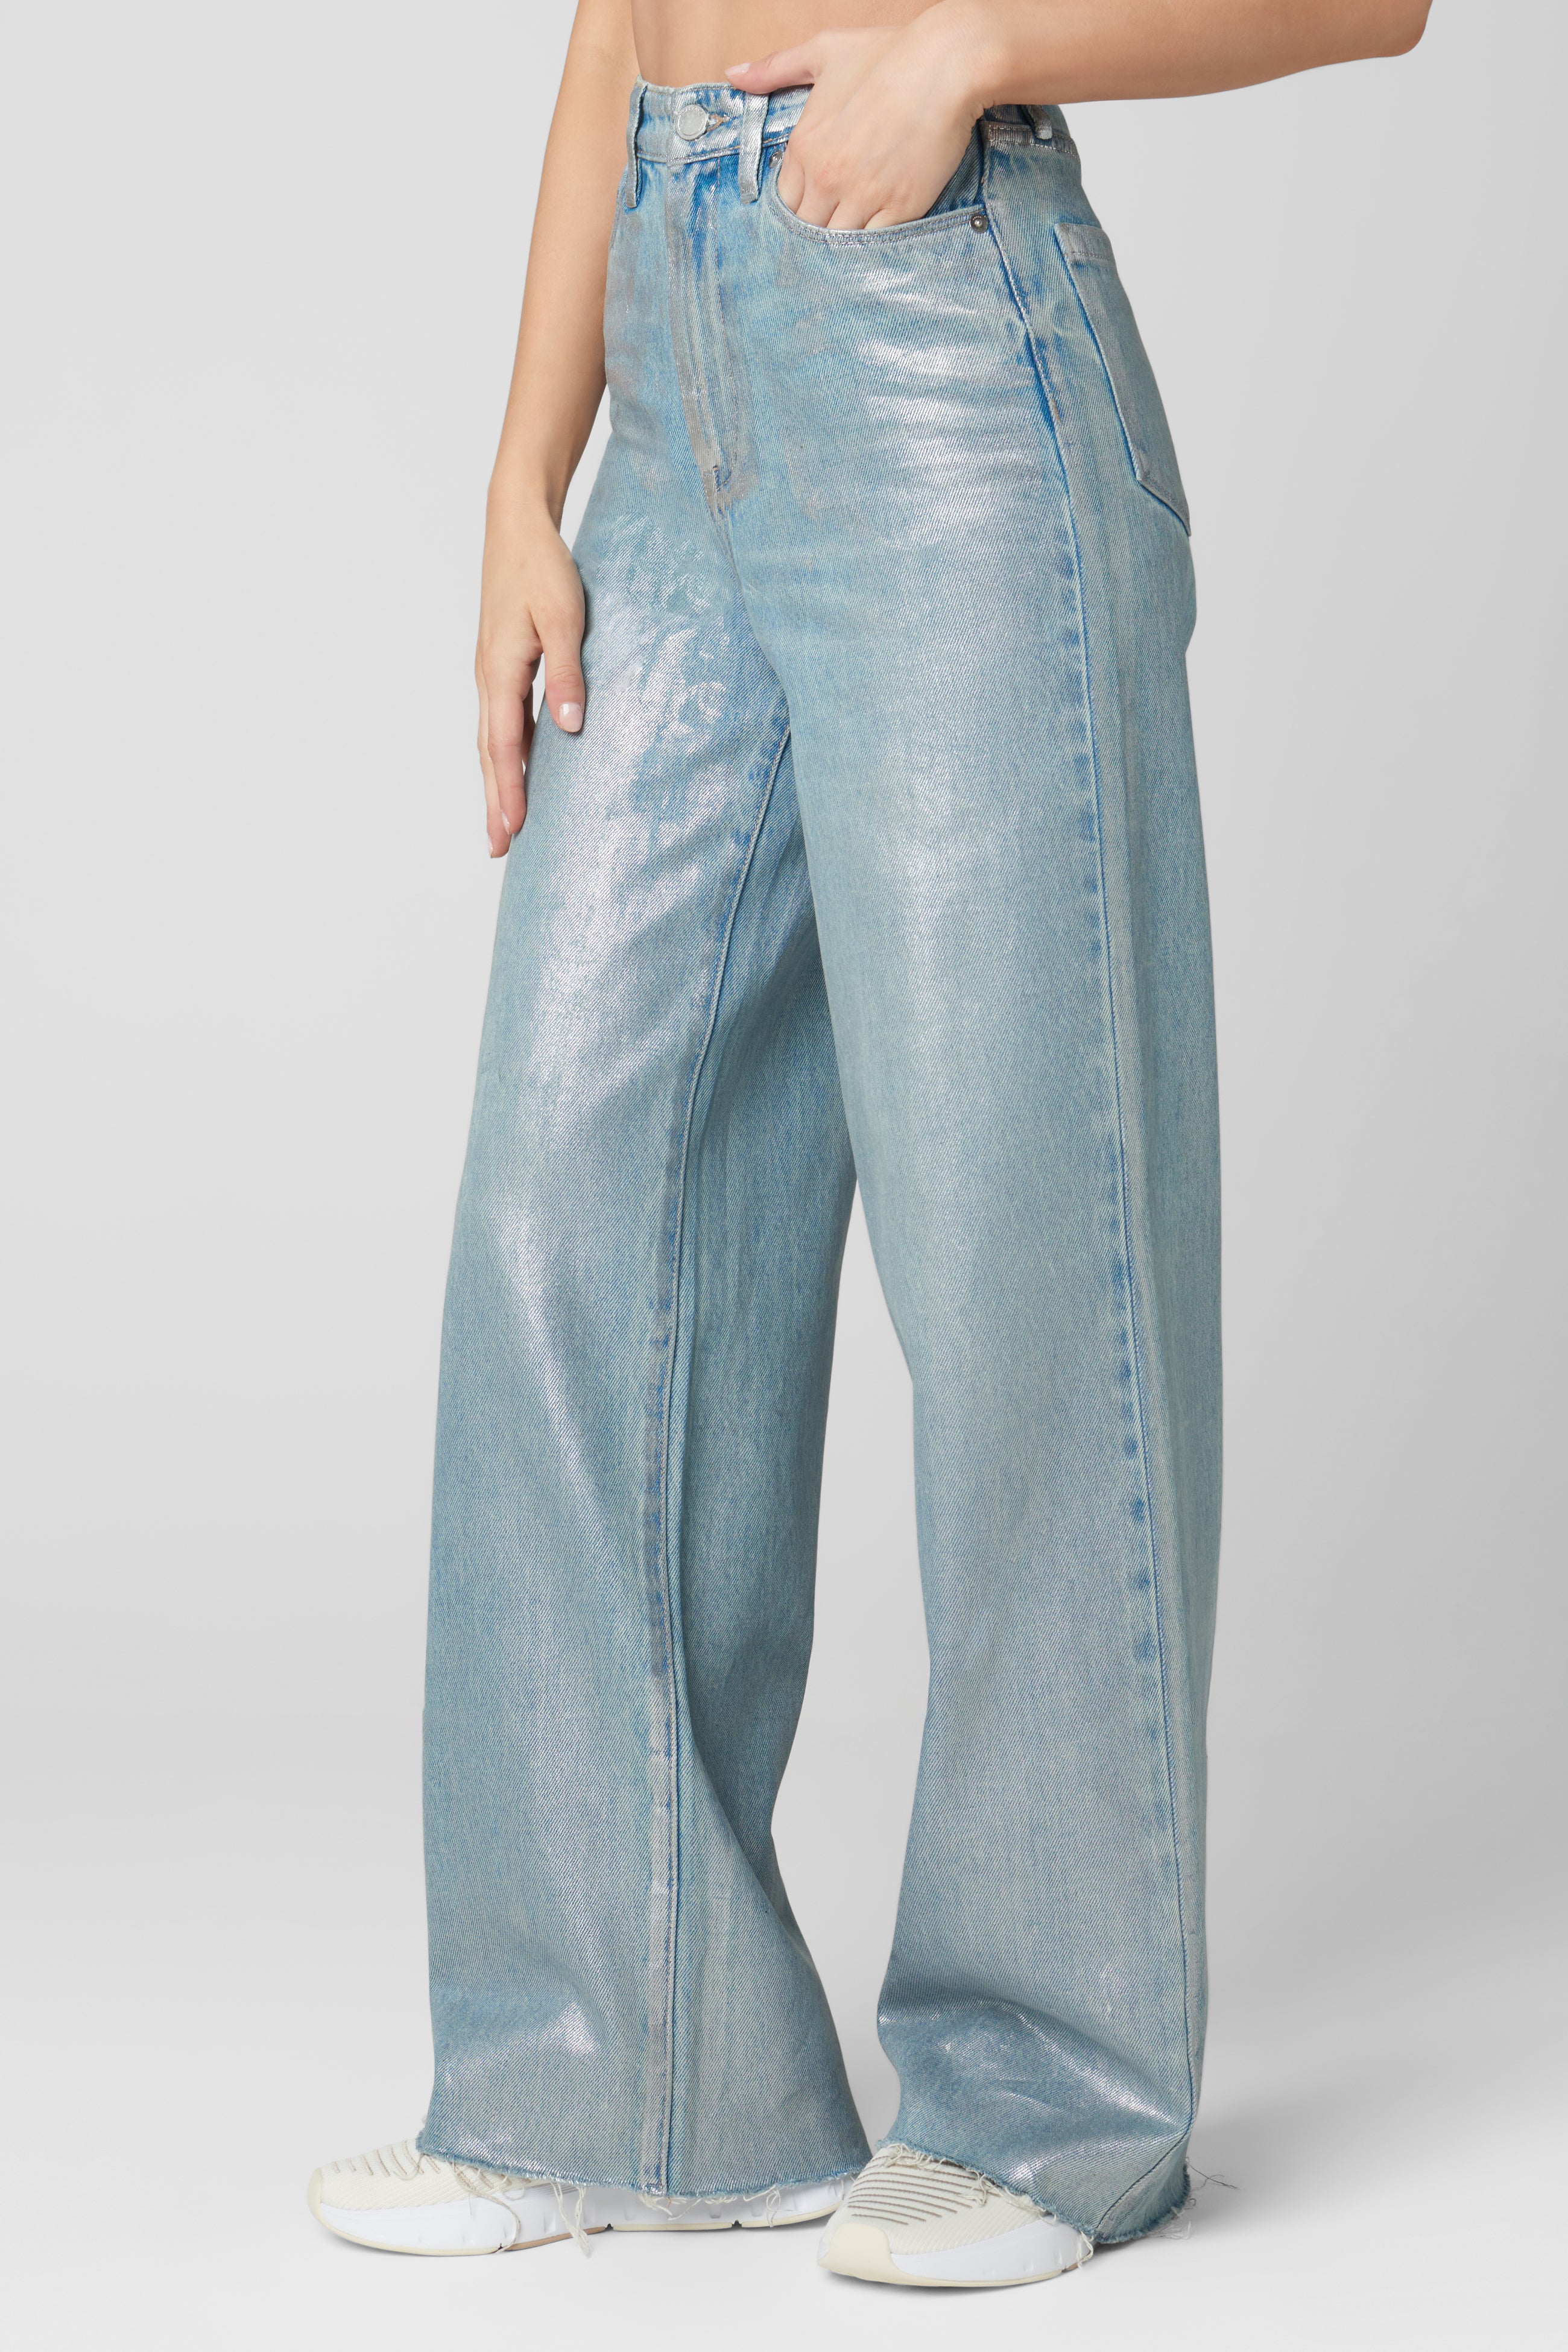 Franklin In Silver Star Pant